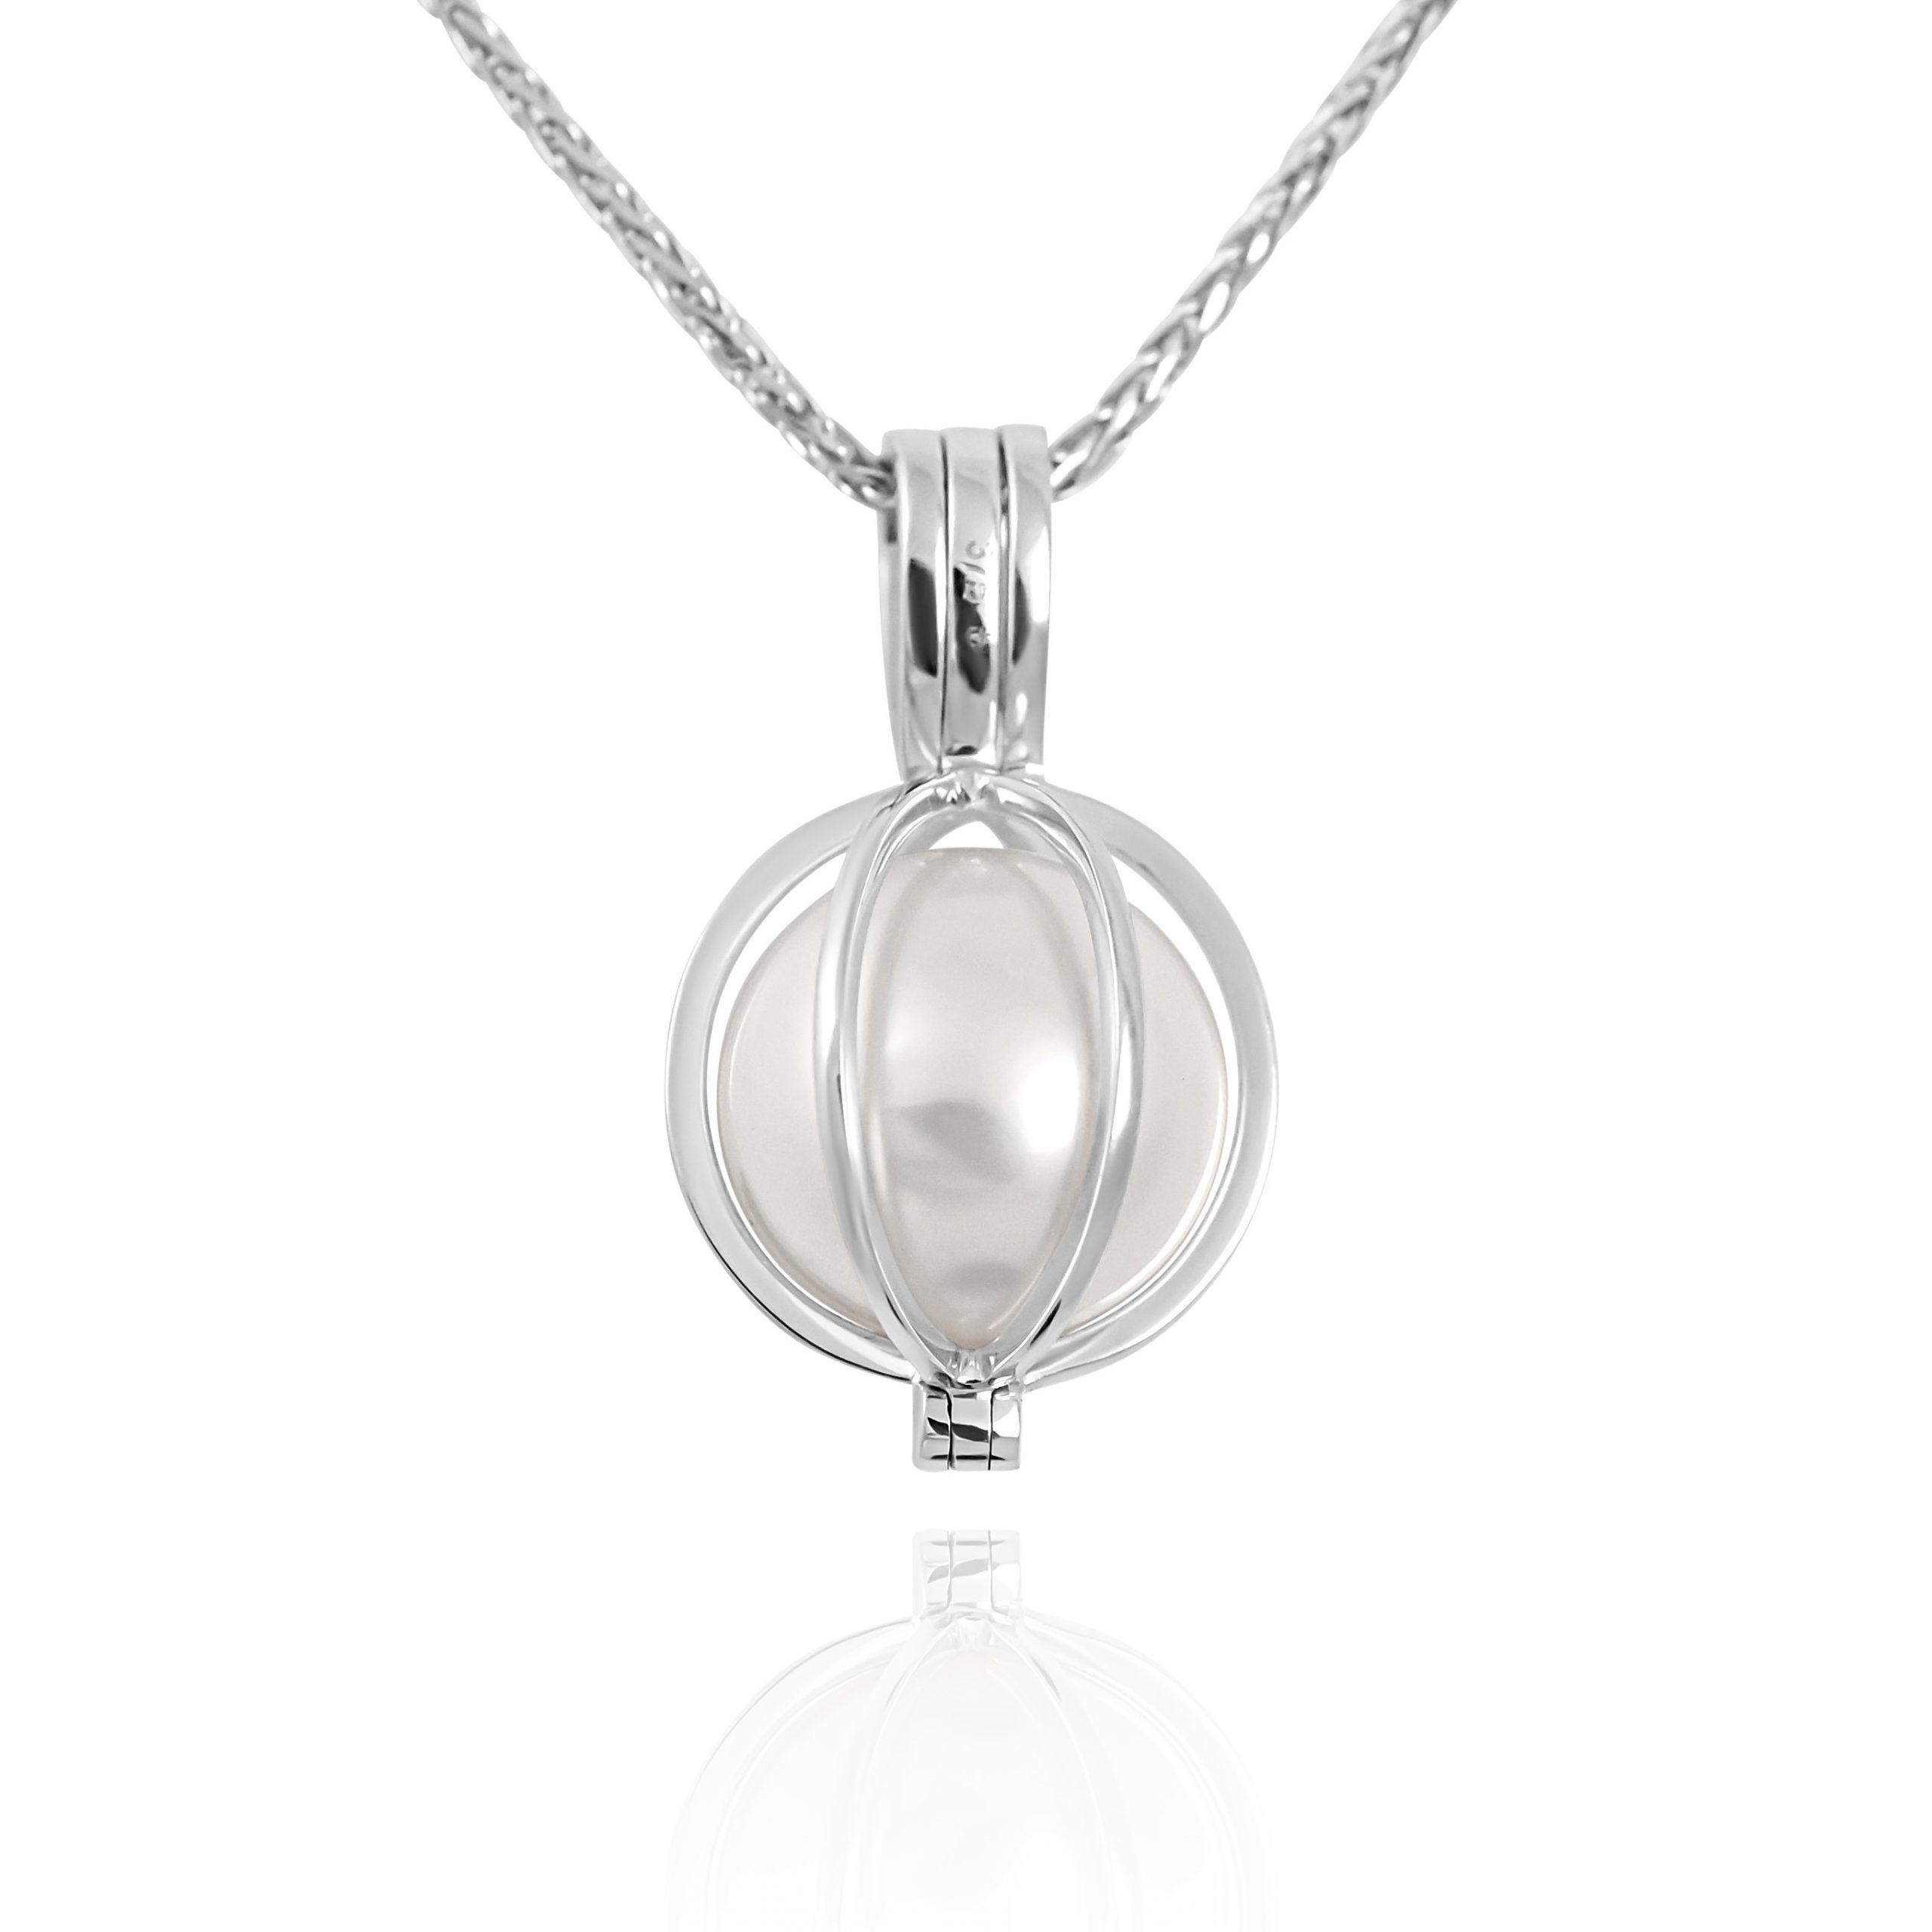 Holding Finger - Solid 925 Sterling Silver - Locket Pearl Cage Pendant -  Hold 6mm-8mm Pearl